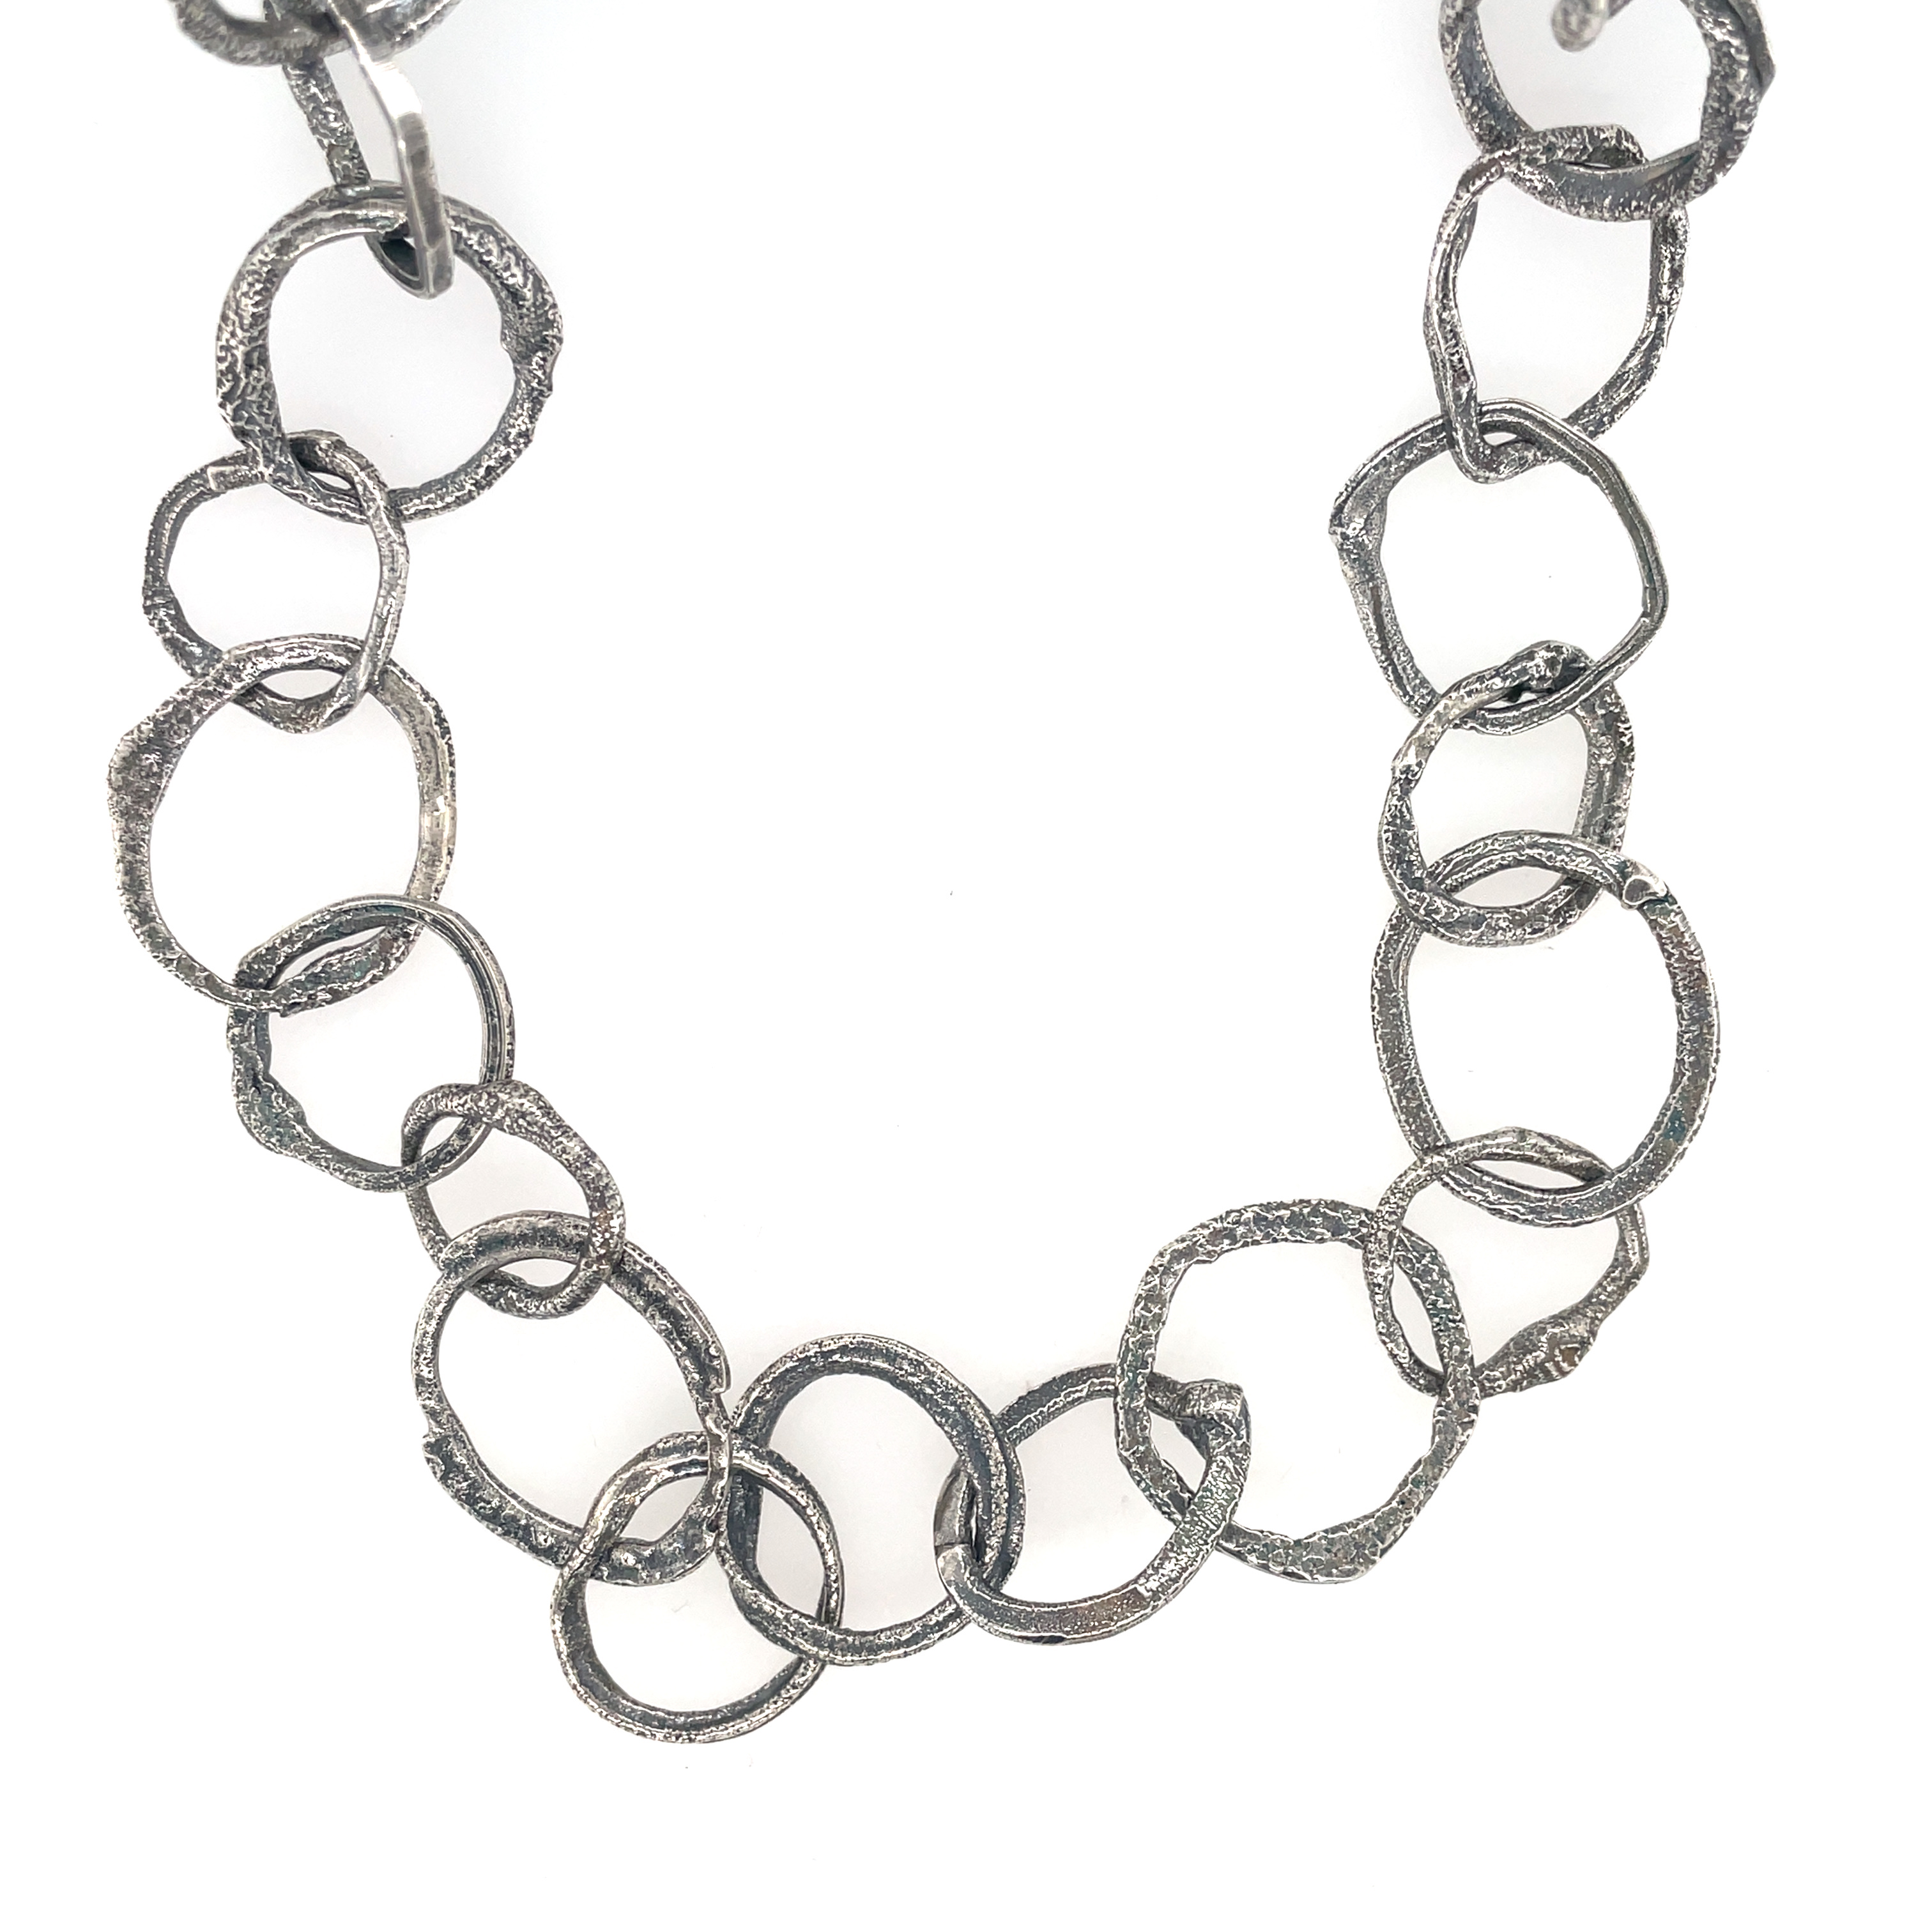 Organic Oxidized Silver Circle Linked Necklace